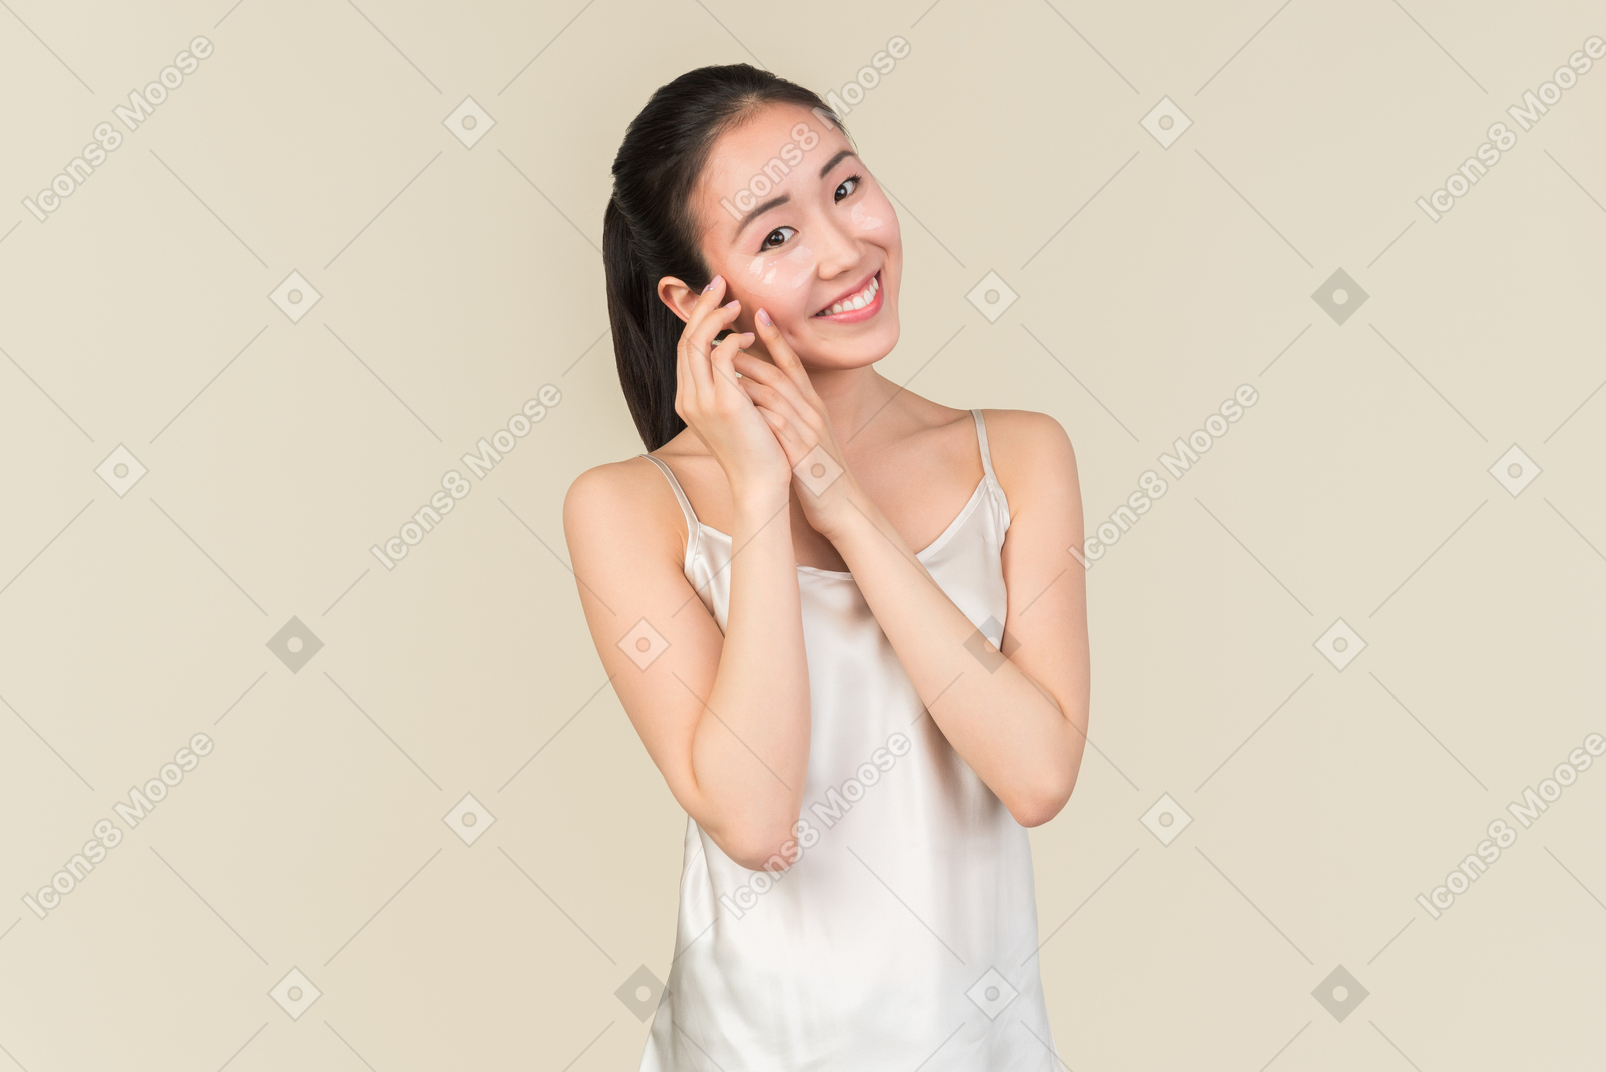 Asian girl with eye patches holding hands close to her face